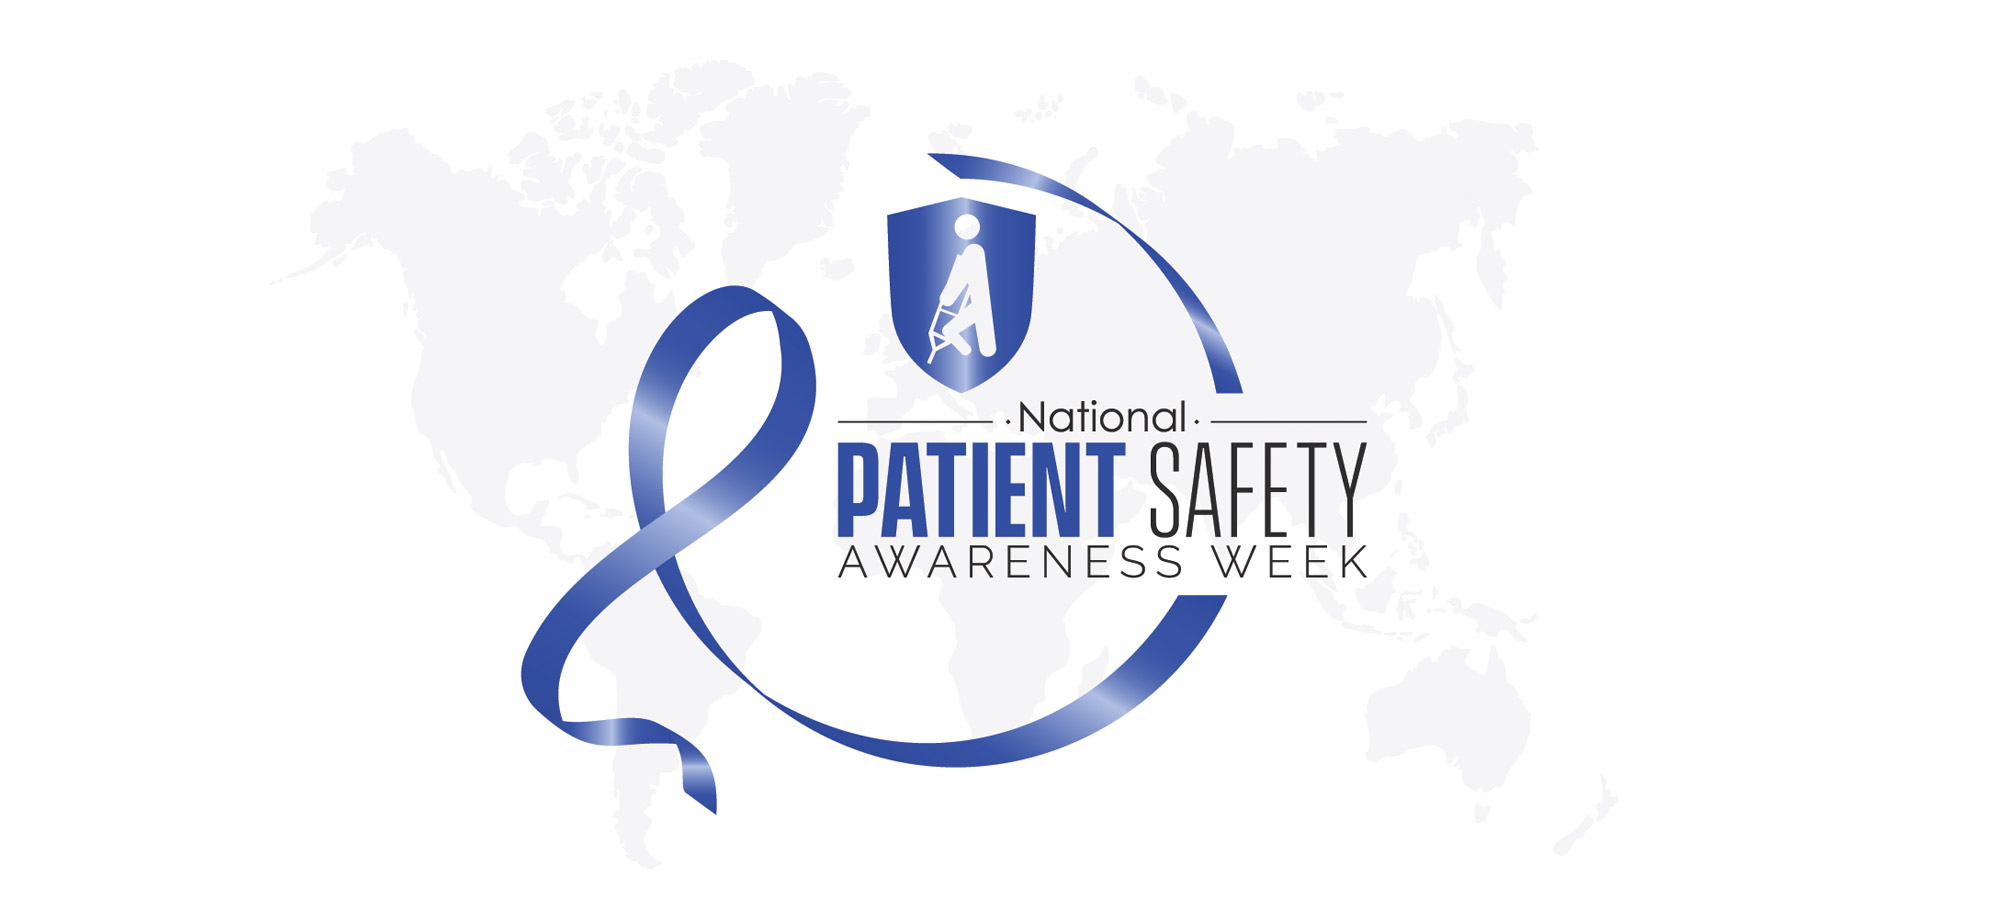 Patient Safety Awareness Week is a good opportunity to rethink infection prevention practices.